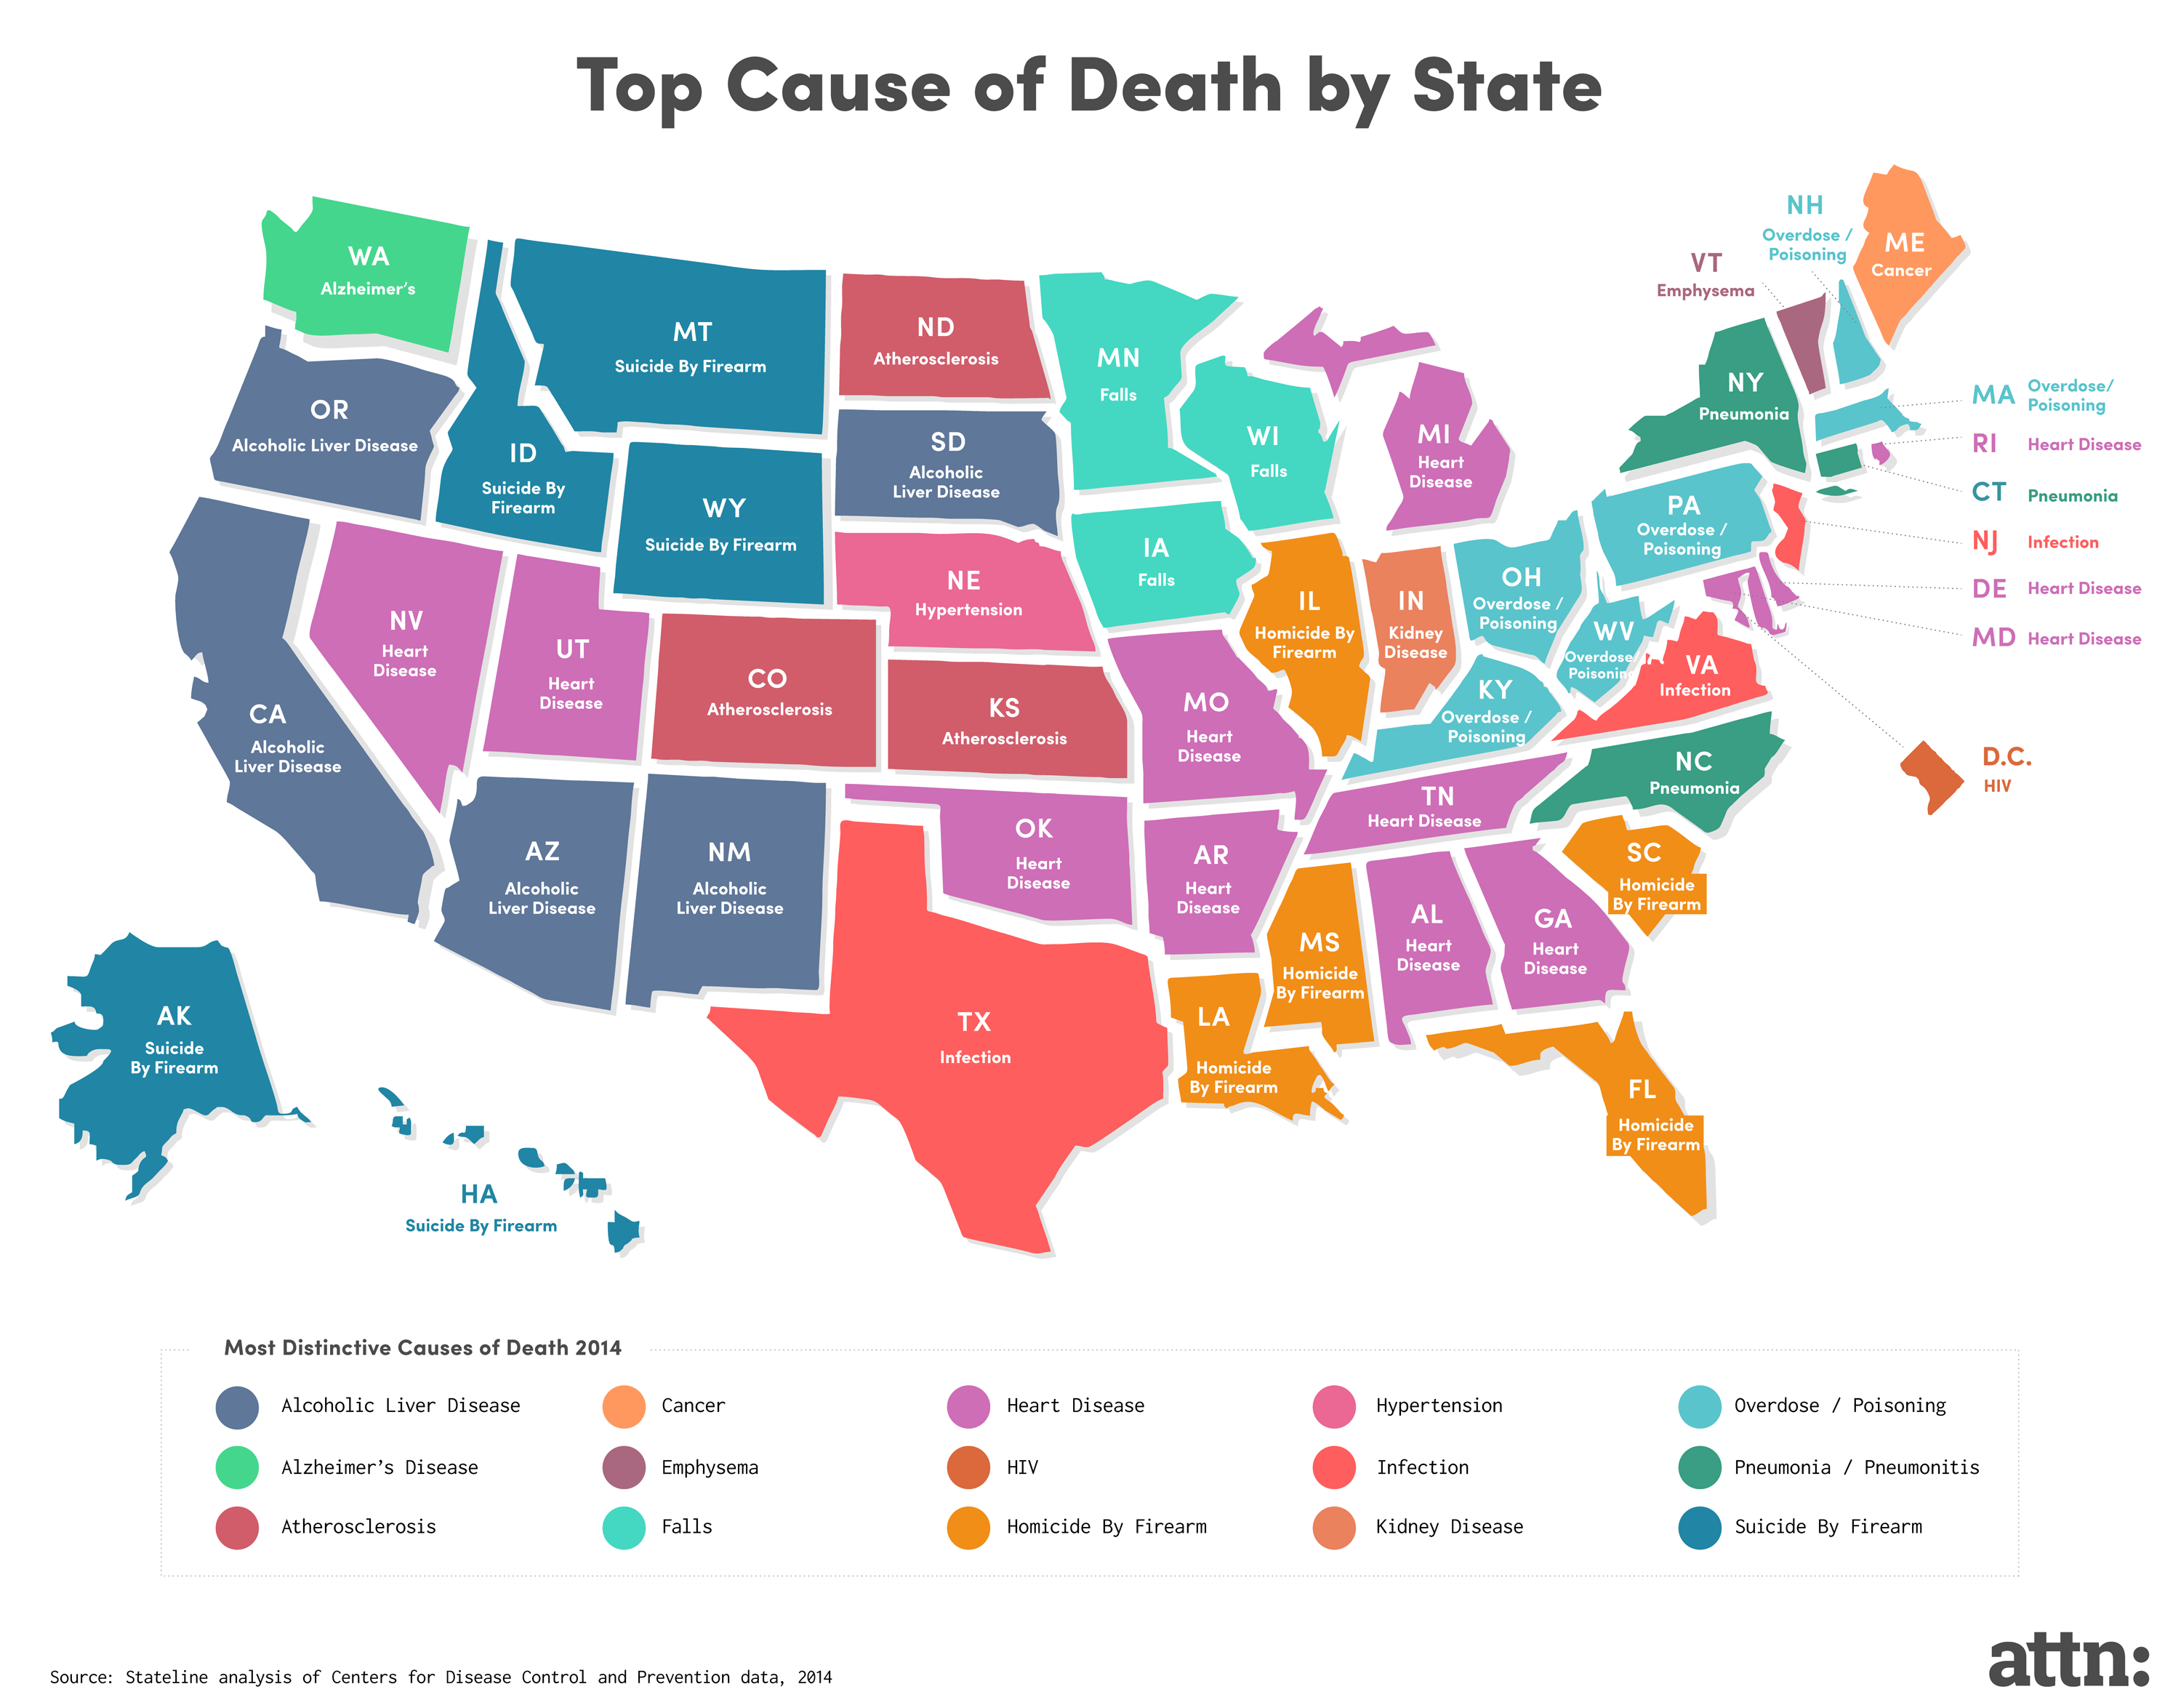 Top cause of death in each state that's higher than the national average. 